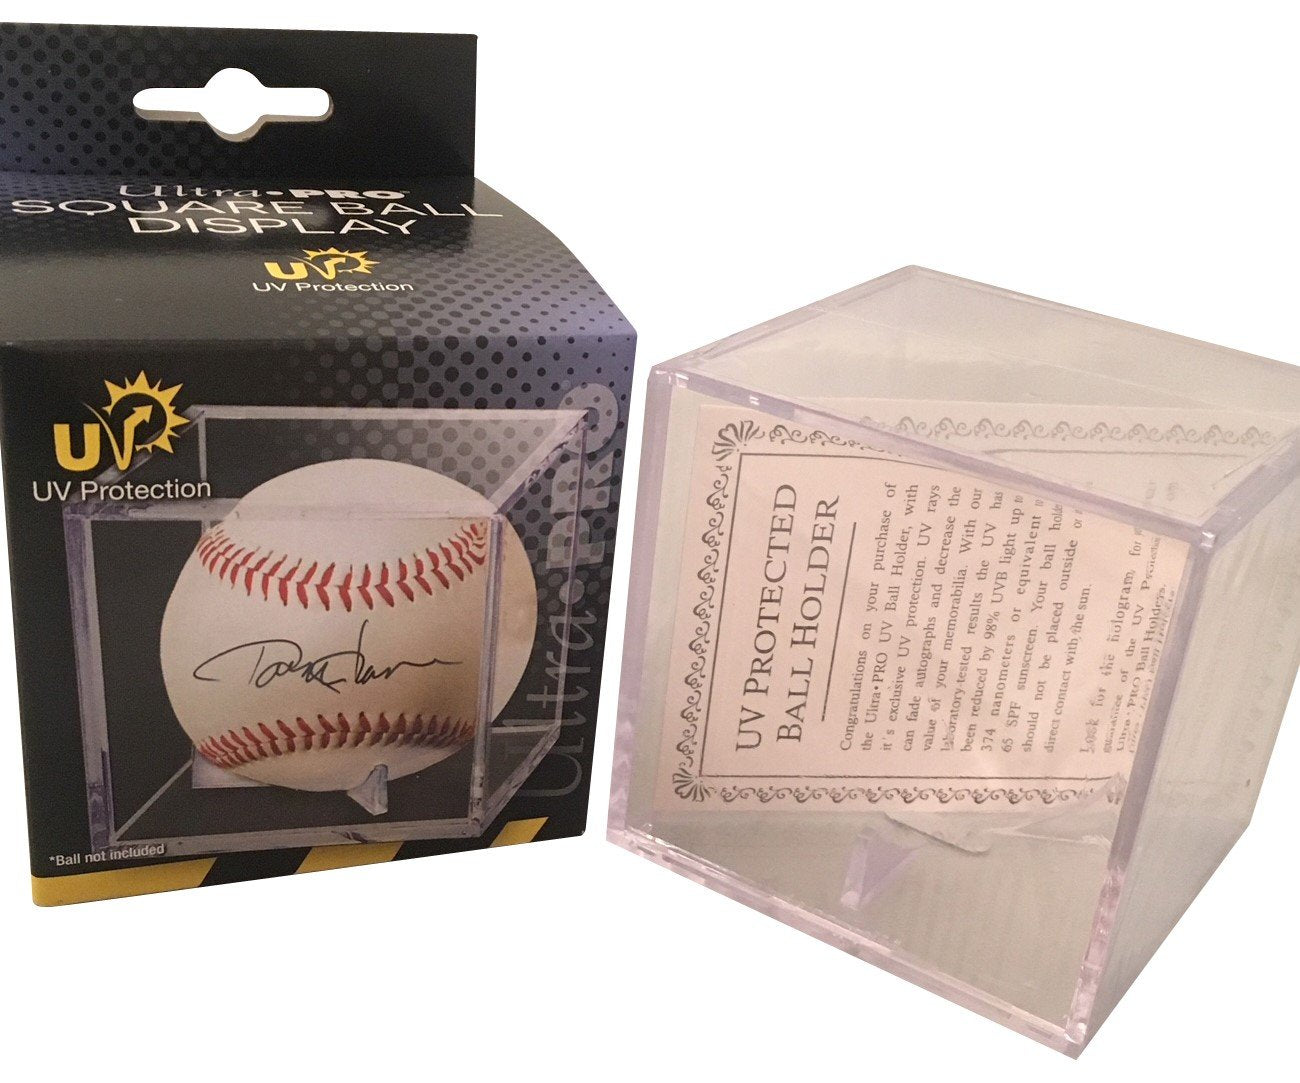 Ronald Acuna Jr Autographed MLB Signed Baseball Beckett Authentication Services COA With UV Display Case-Powers Sports Memorabilia